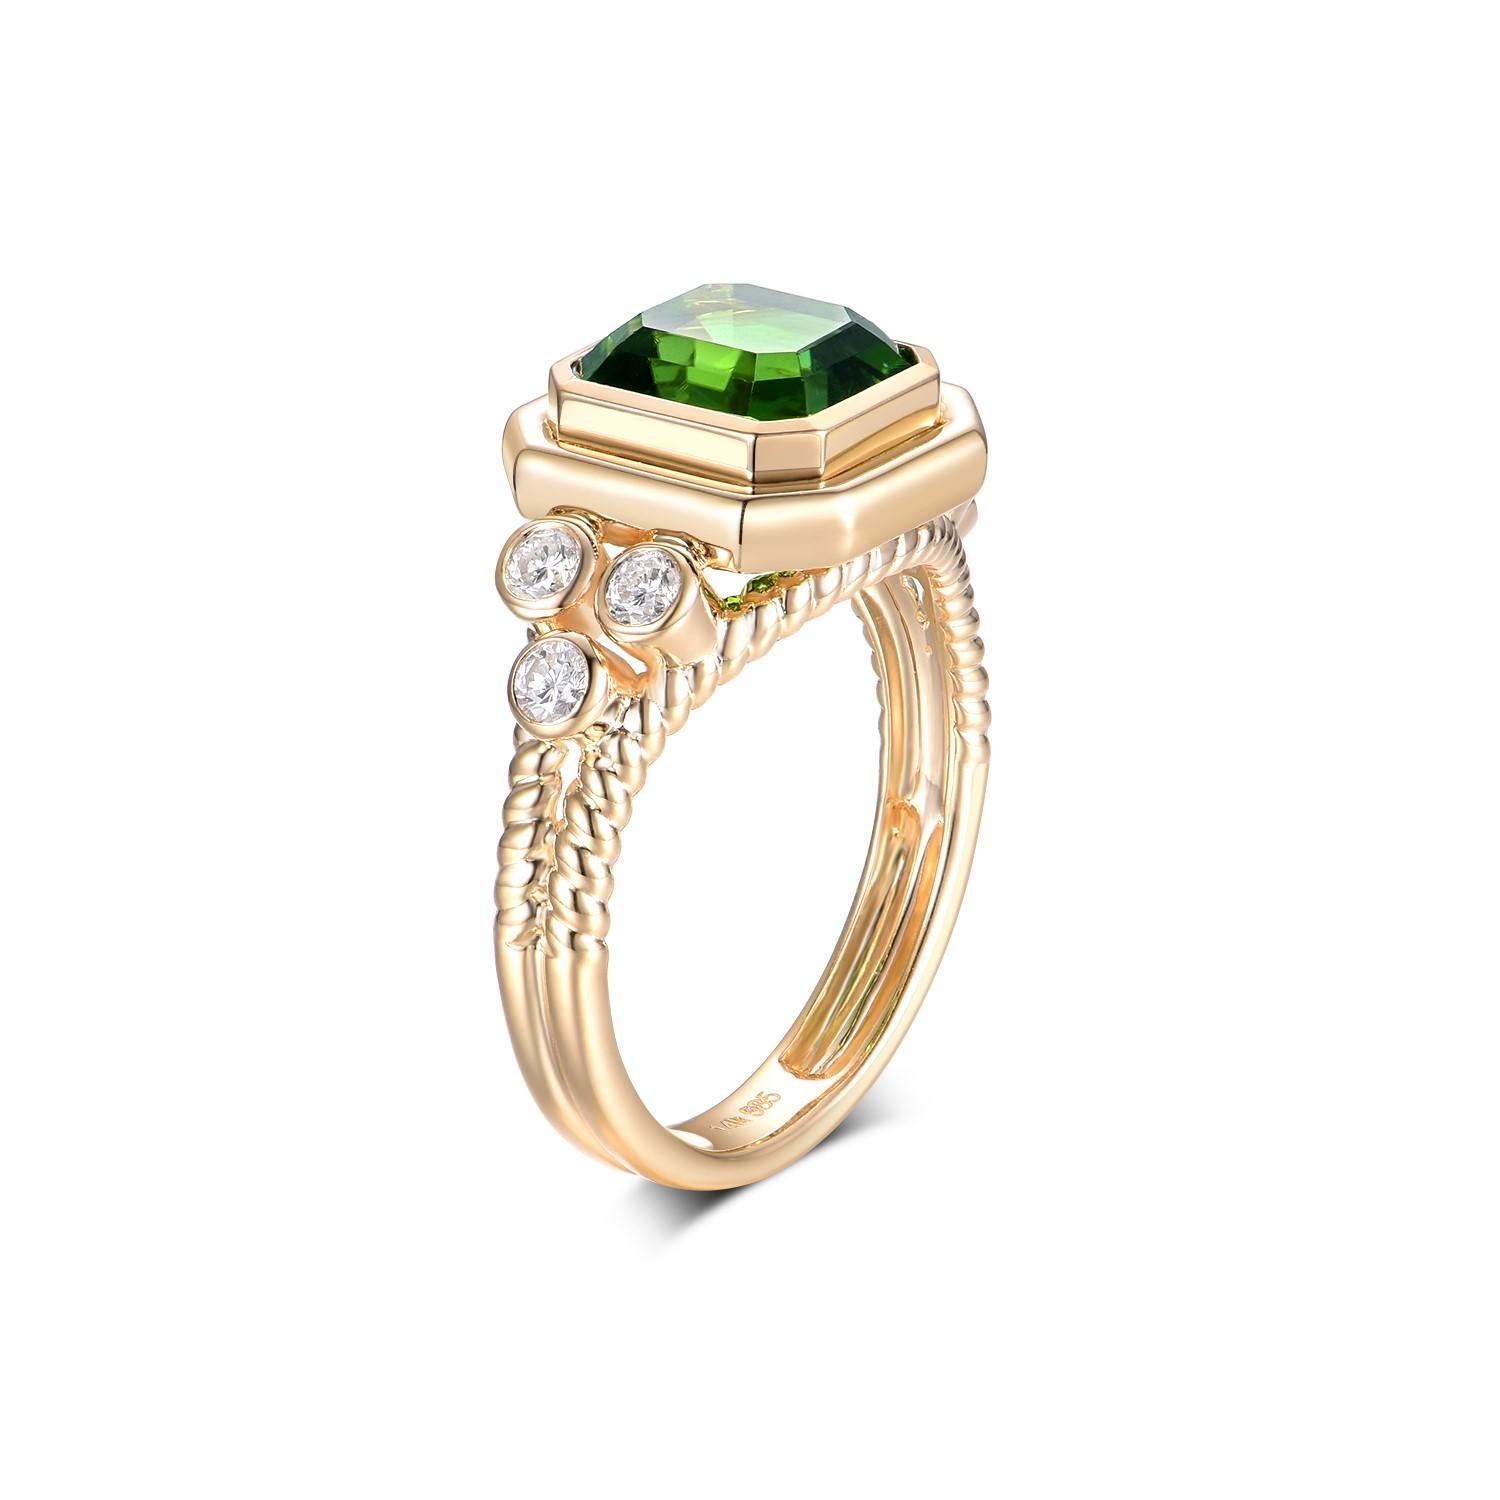 This is an exquisite Tourmaline Cocktail Ring crafted in 18-karat yellow gold, showcasing a splendid example of fine jewelry design. The ring features a magnificent 3.34-carat tourmaline as its centerpiece. This tourmaline is cut into a classic